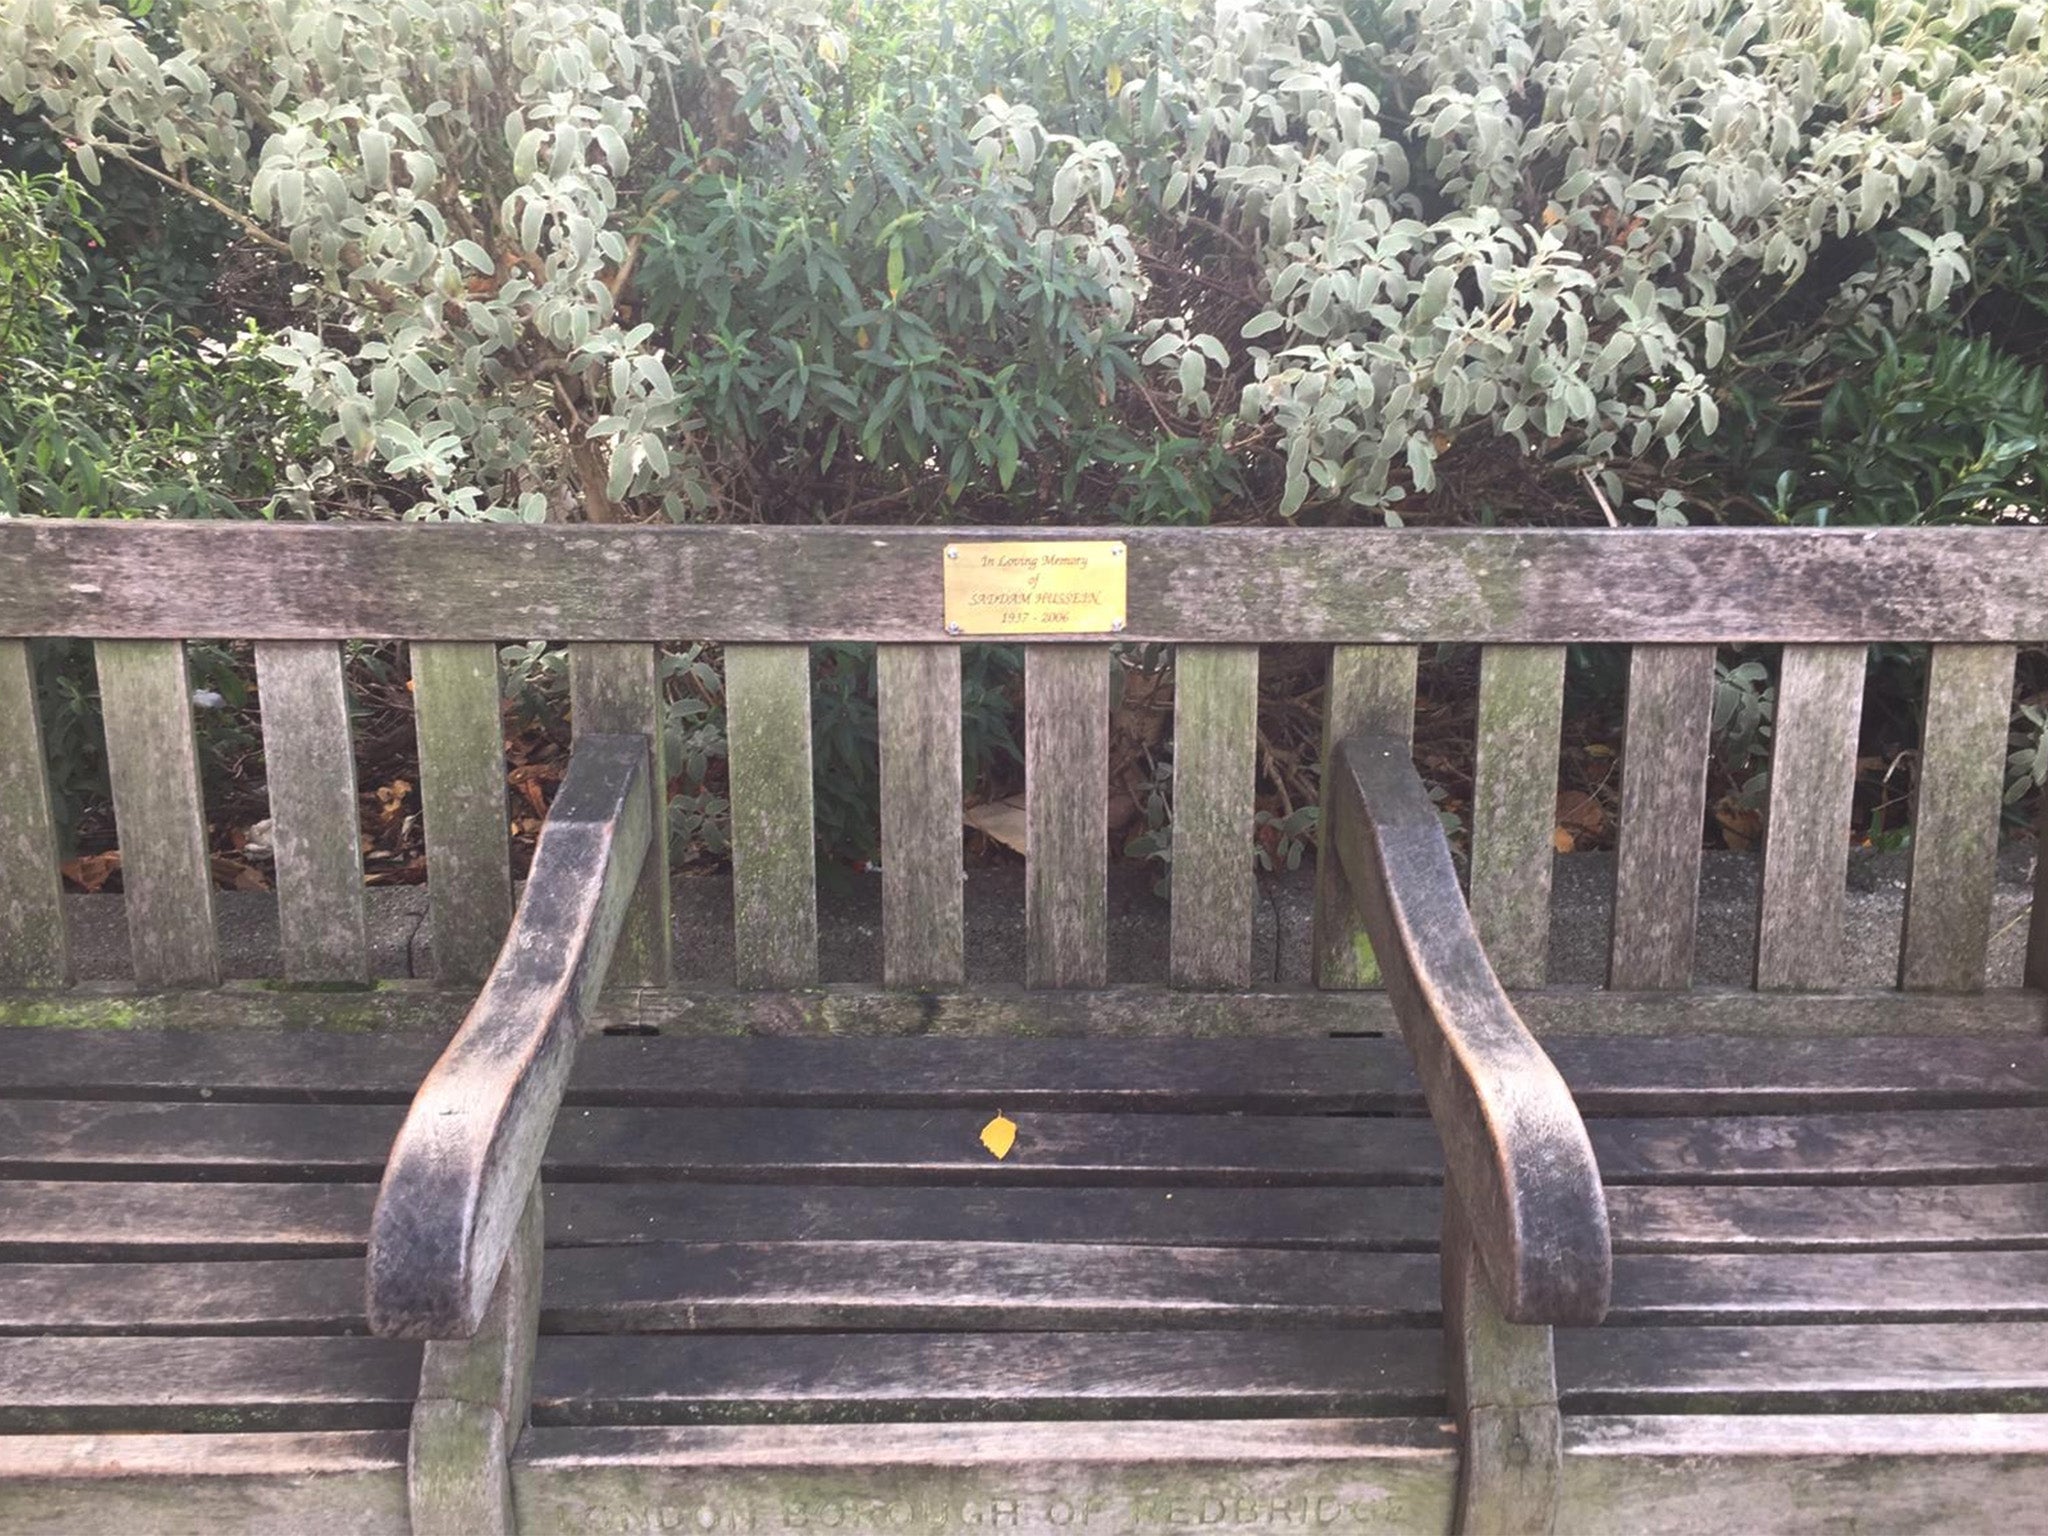 The Wanstead bench